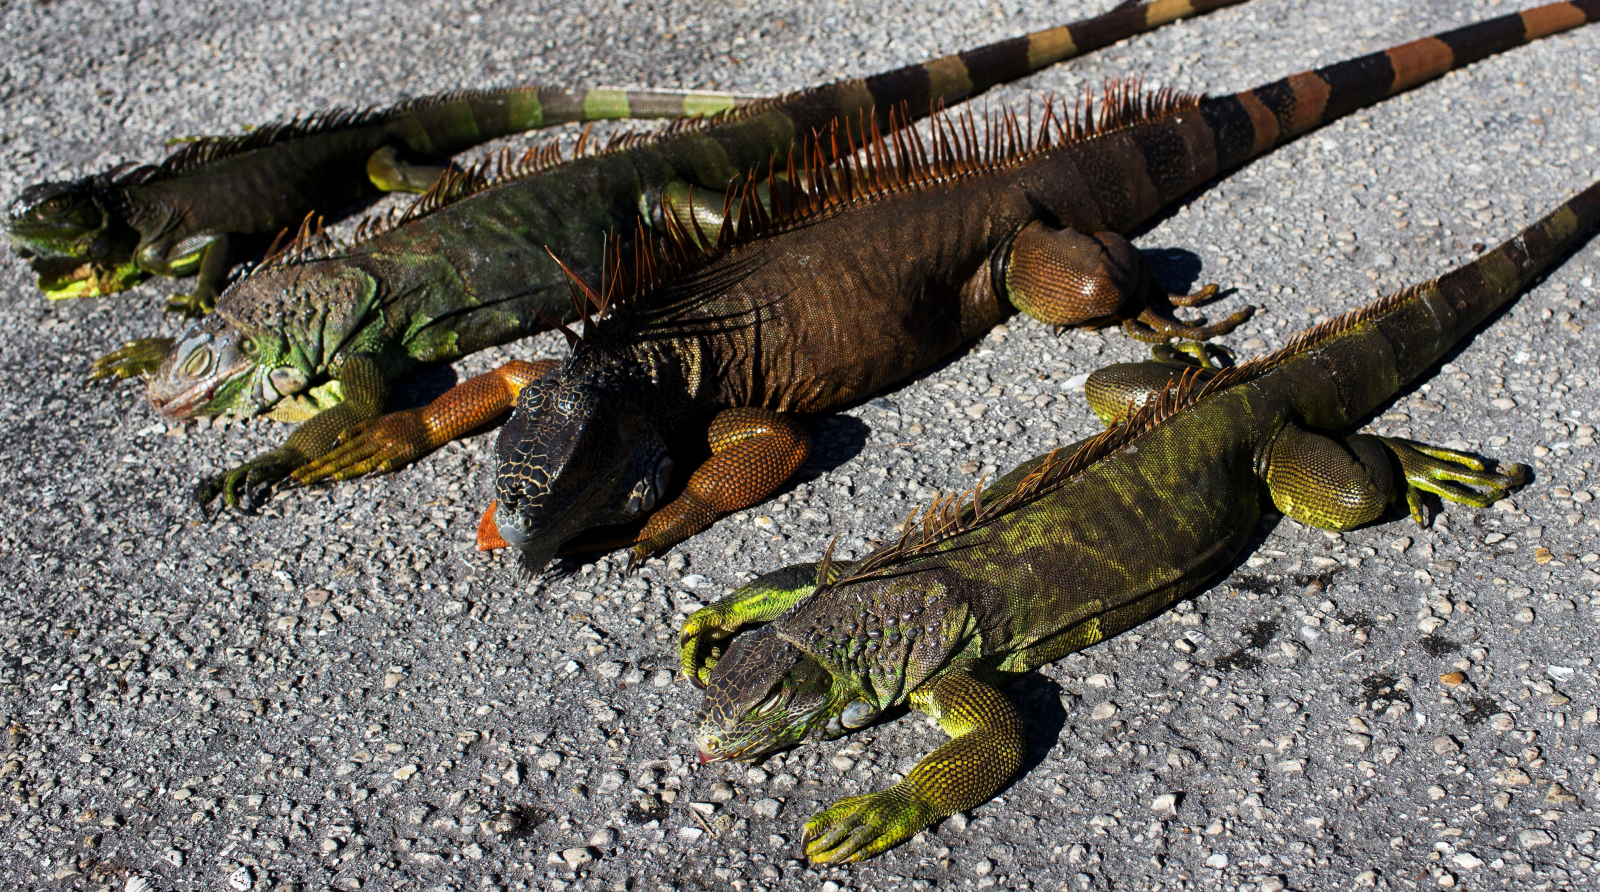 Frozen iguanas falling from trees in Florida due to extreme weather conditions